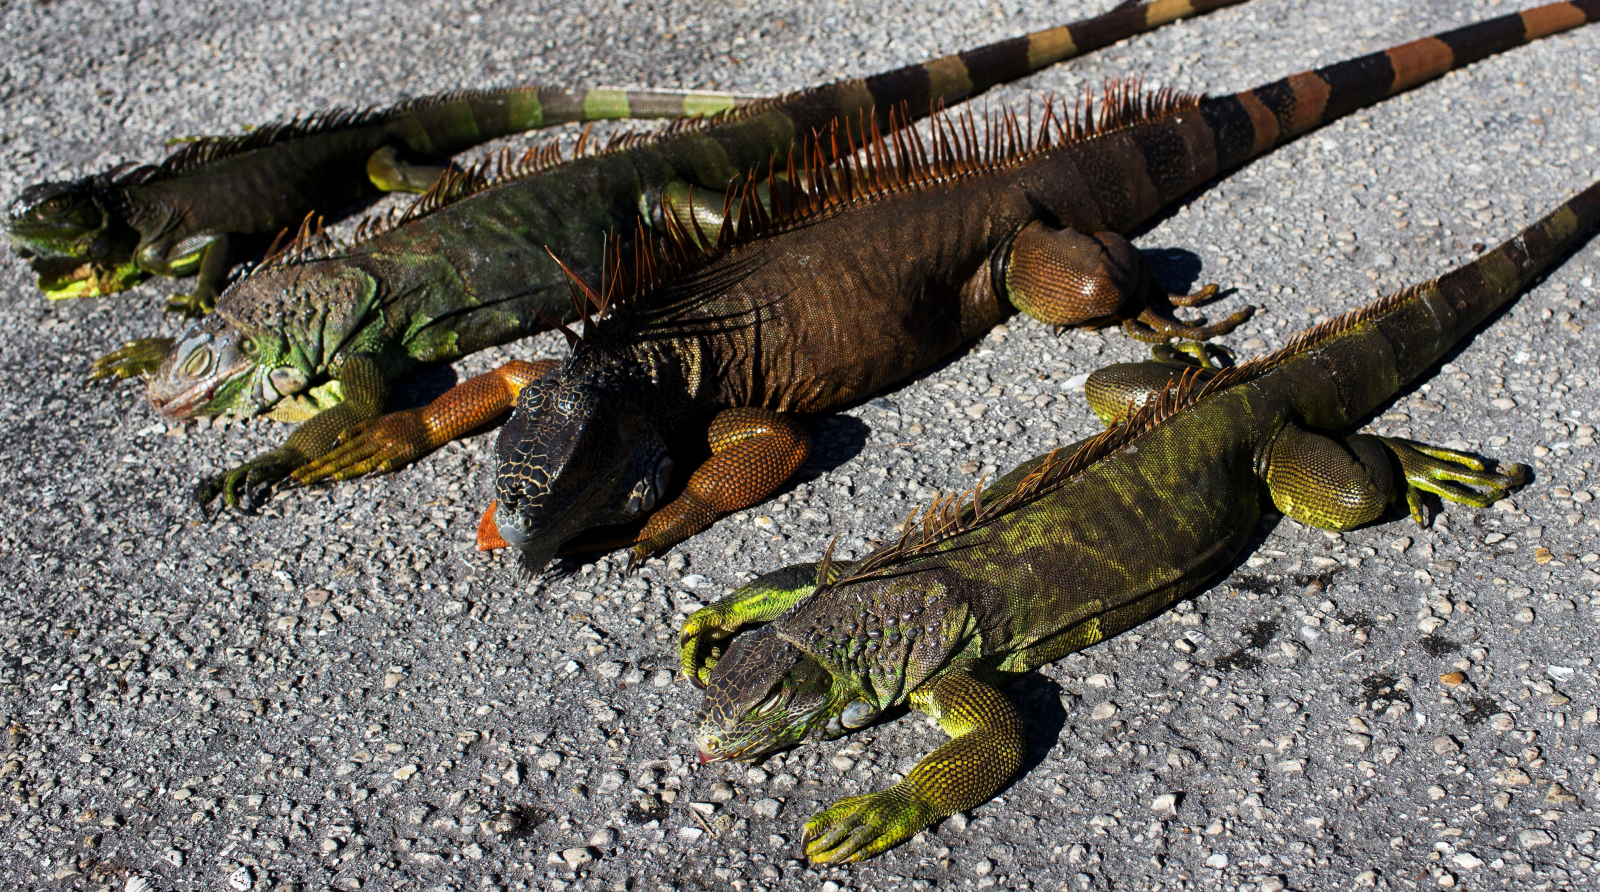 Frozen iguanas falling from trees in Florida due to extreme weather conditions